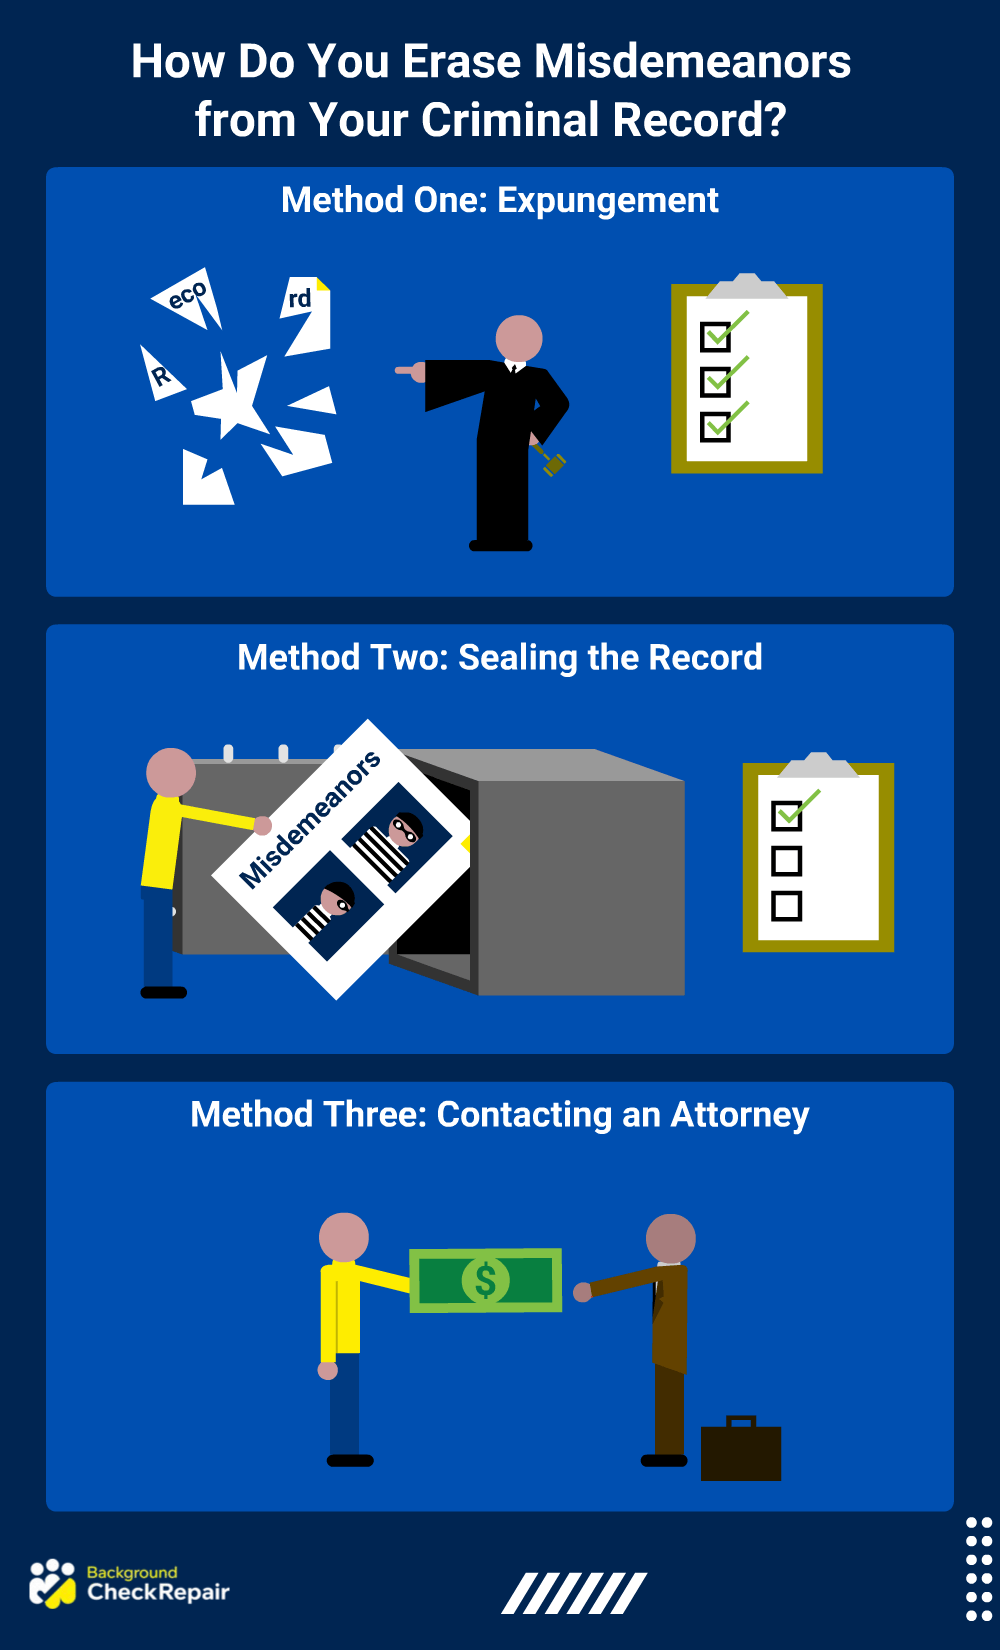 How long does misdemenaor stay on record question answered by graphic showing how to erase misdemenaors on record through expungement, sealing and contacting an attorney to perfomr the process so that the time a misdemeanor on your record can be reduced.